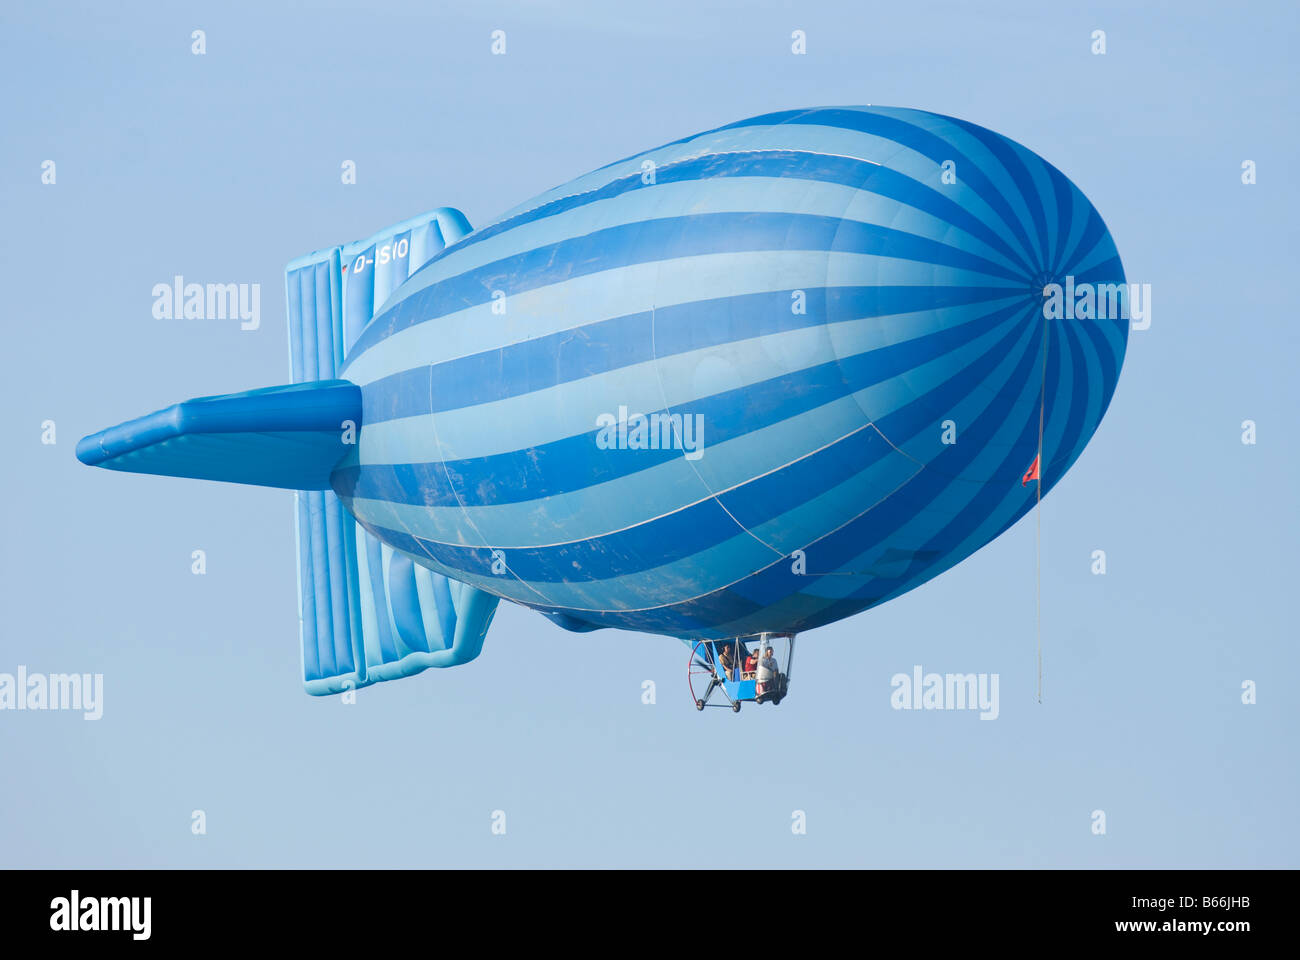 Hot air balloon with German registration shaped as an old fashioned airship  Stock Photo - Alamy